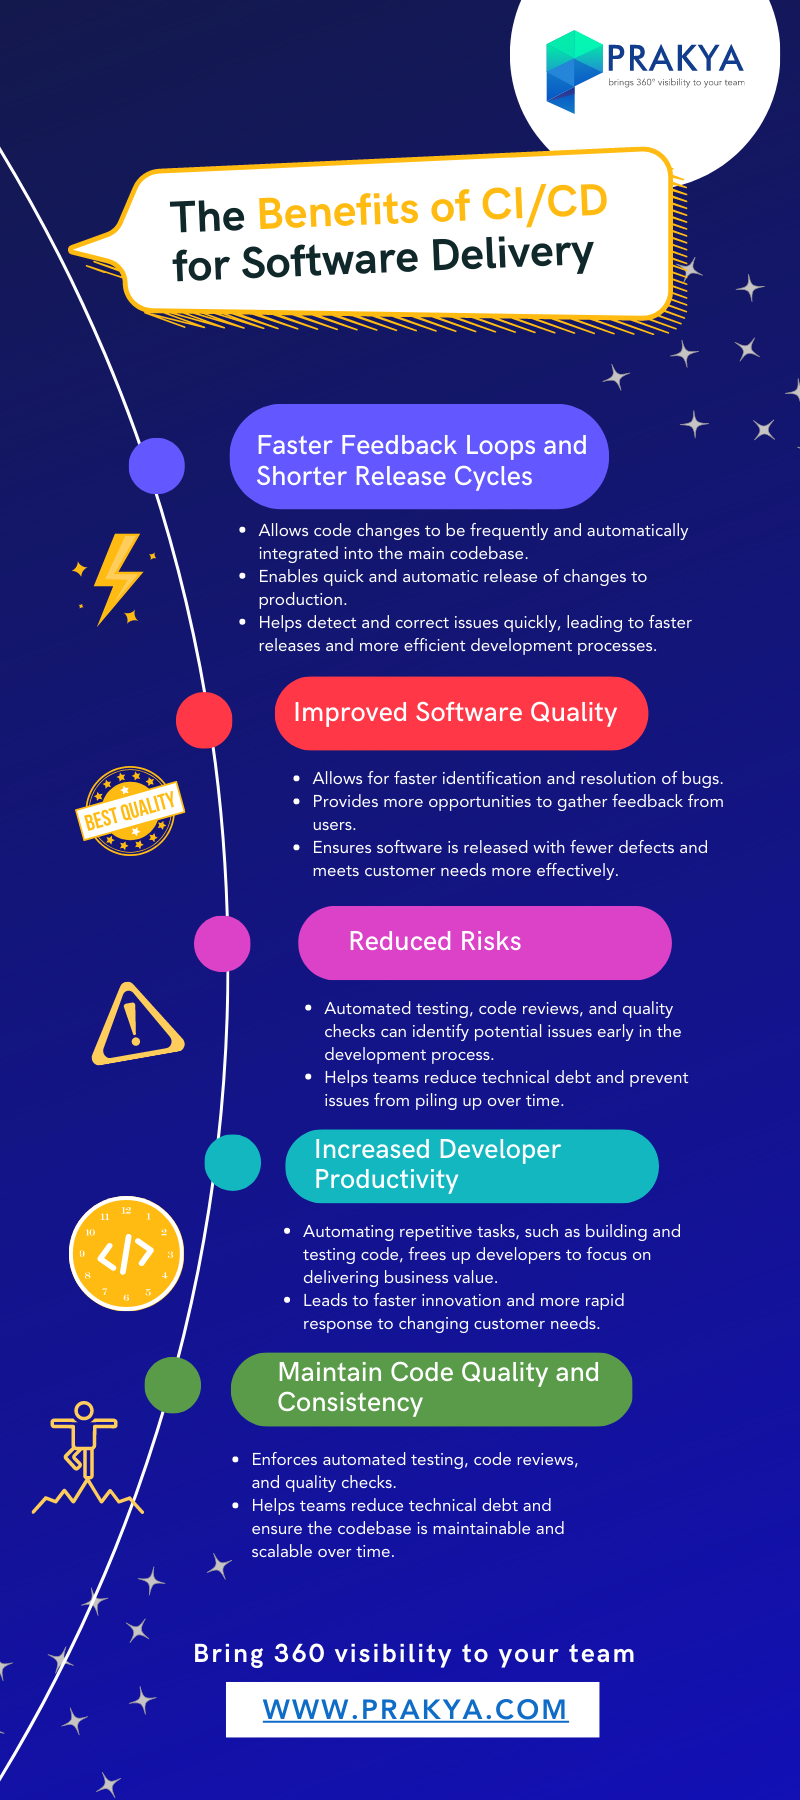 An infographic titled "The Benefits of CI/CD for Software Delivery" shows various benefits of CI/CD, including faster feedback loops, improved software quality, reduced risks, increased developer productivity, and maintained code quality and consistency. It emphasizes the importance of implementing the right tools to successfully implement CI/CD and achieve faster and higher-quality software delivery.